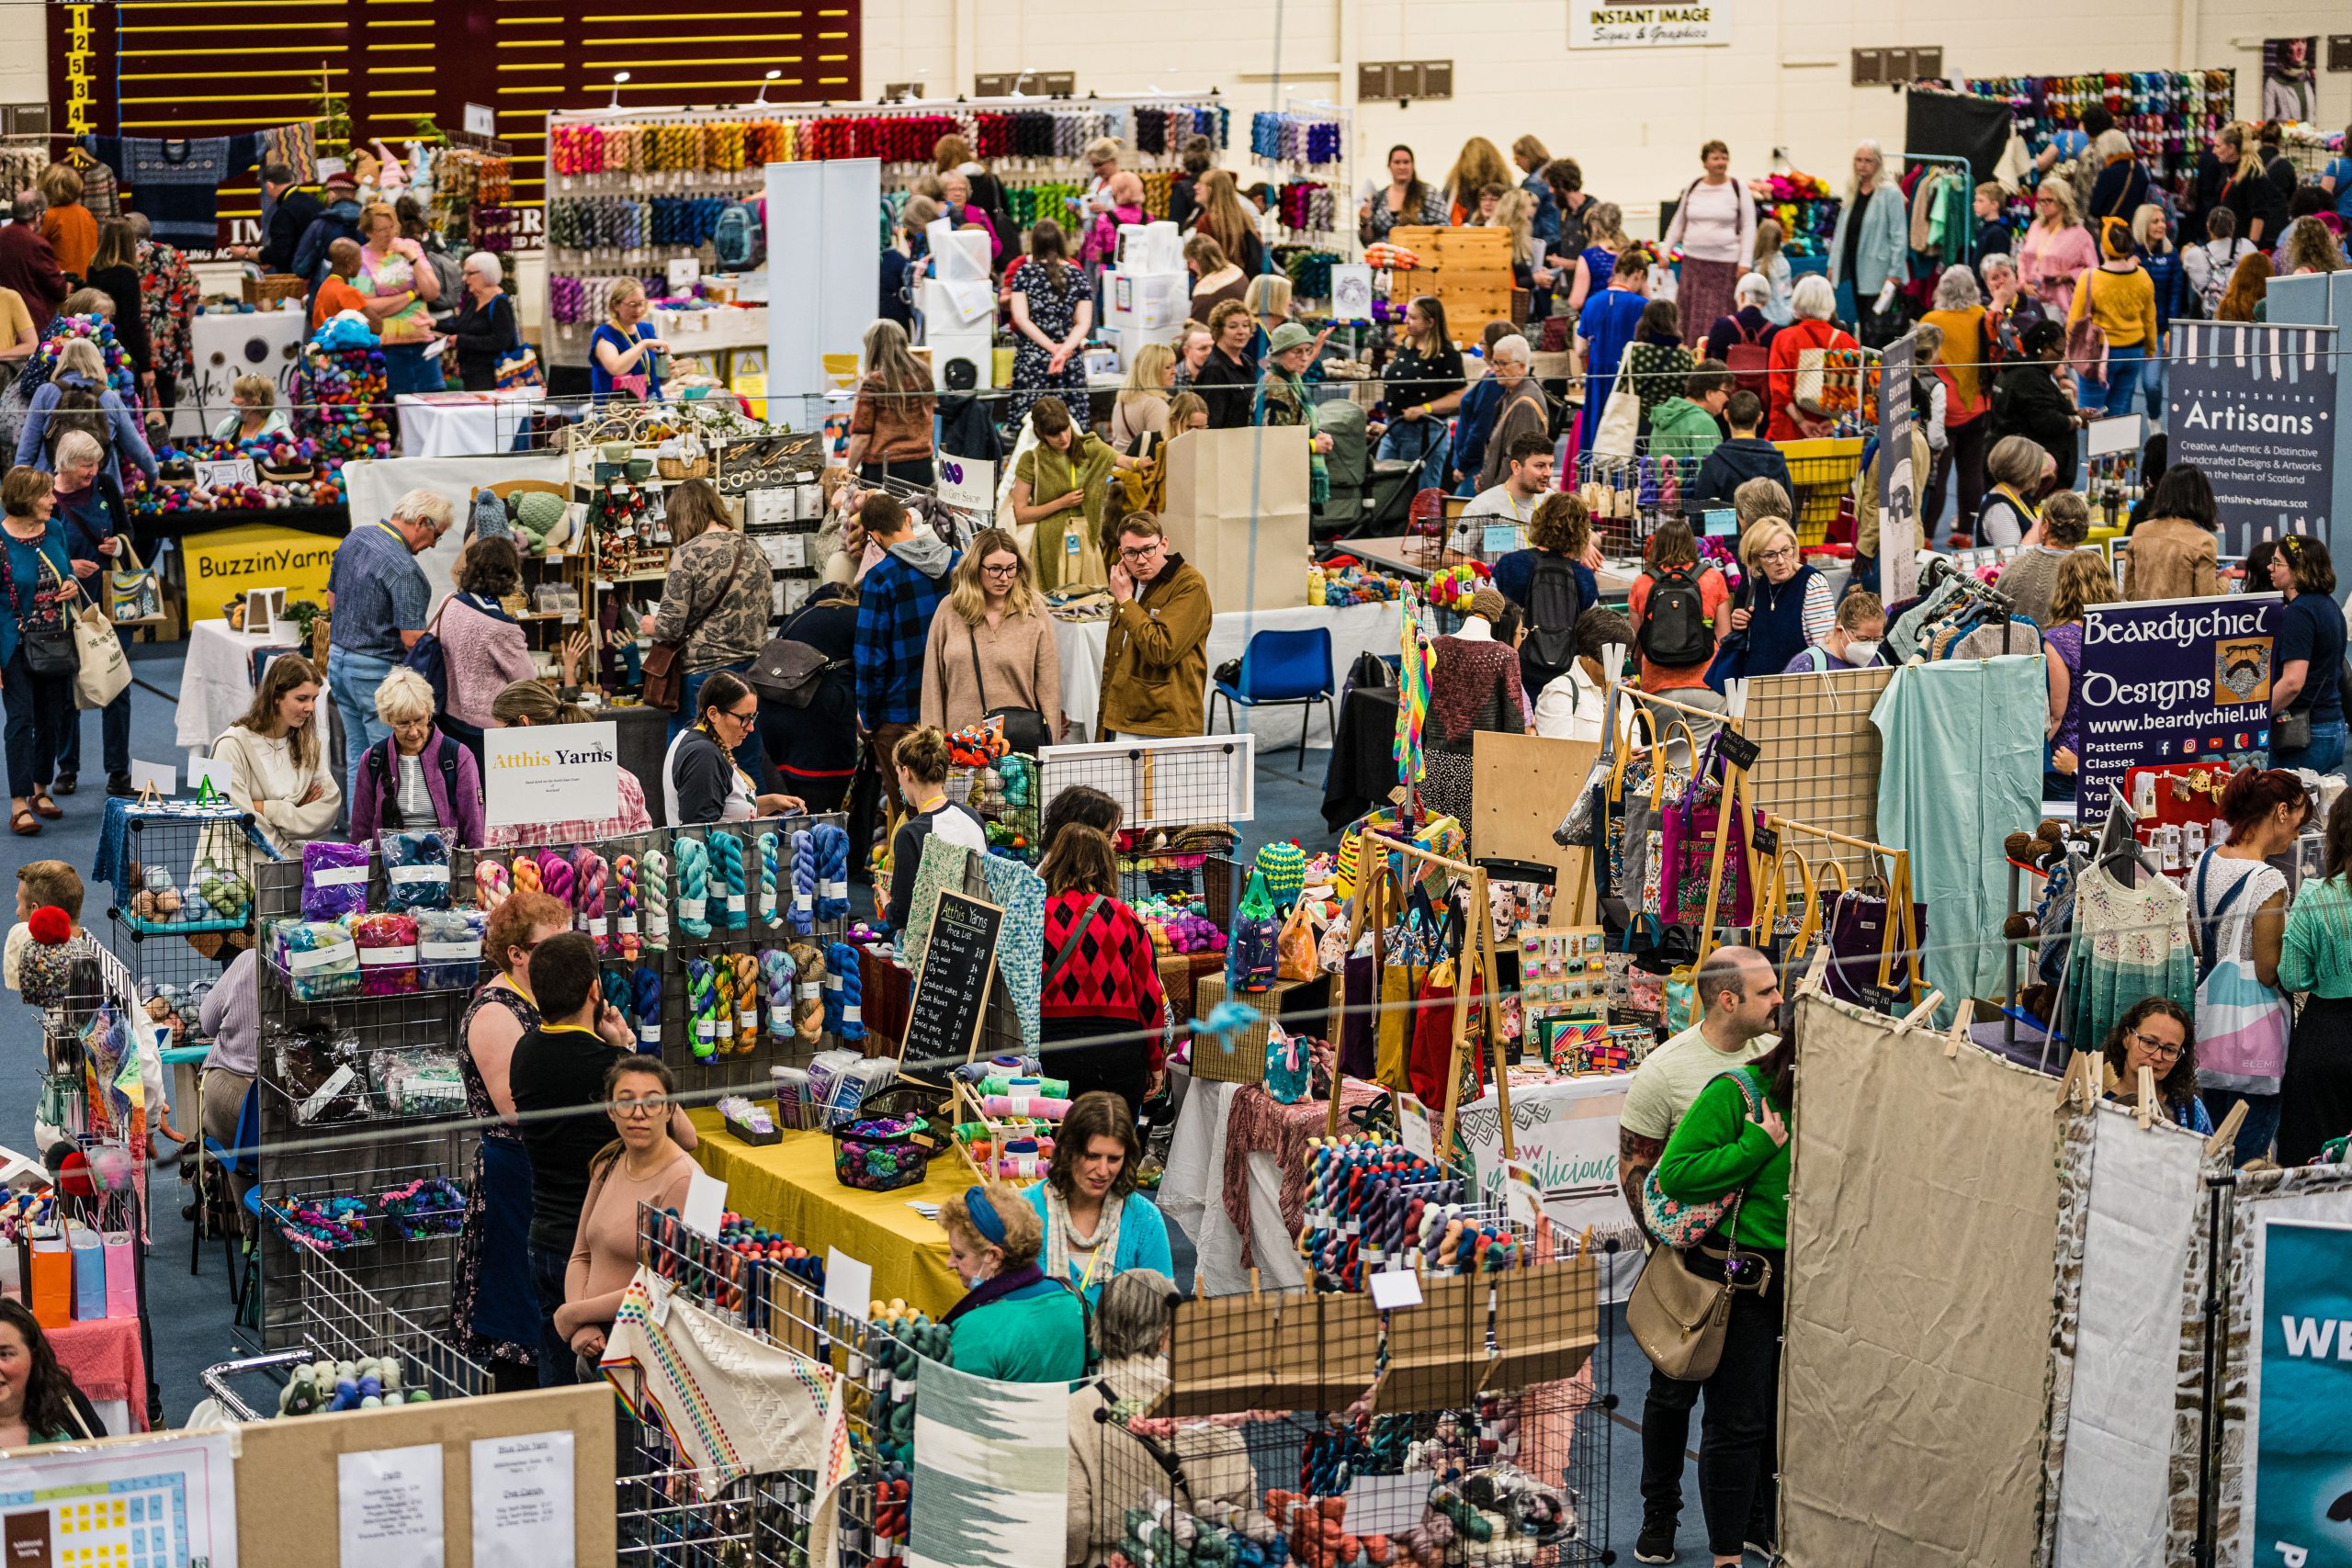 Hall filled with sellers and buyers of colourful yarn